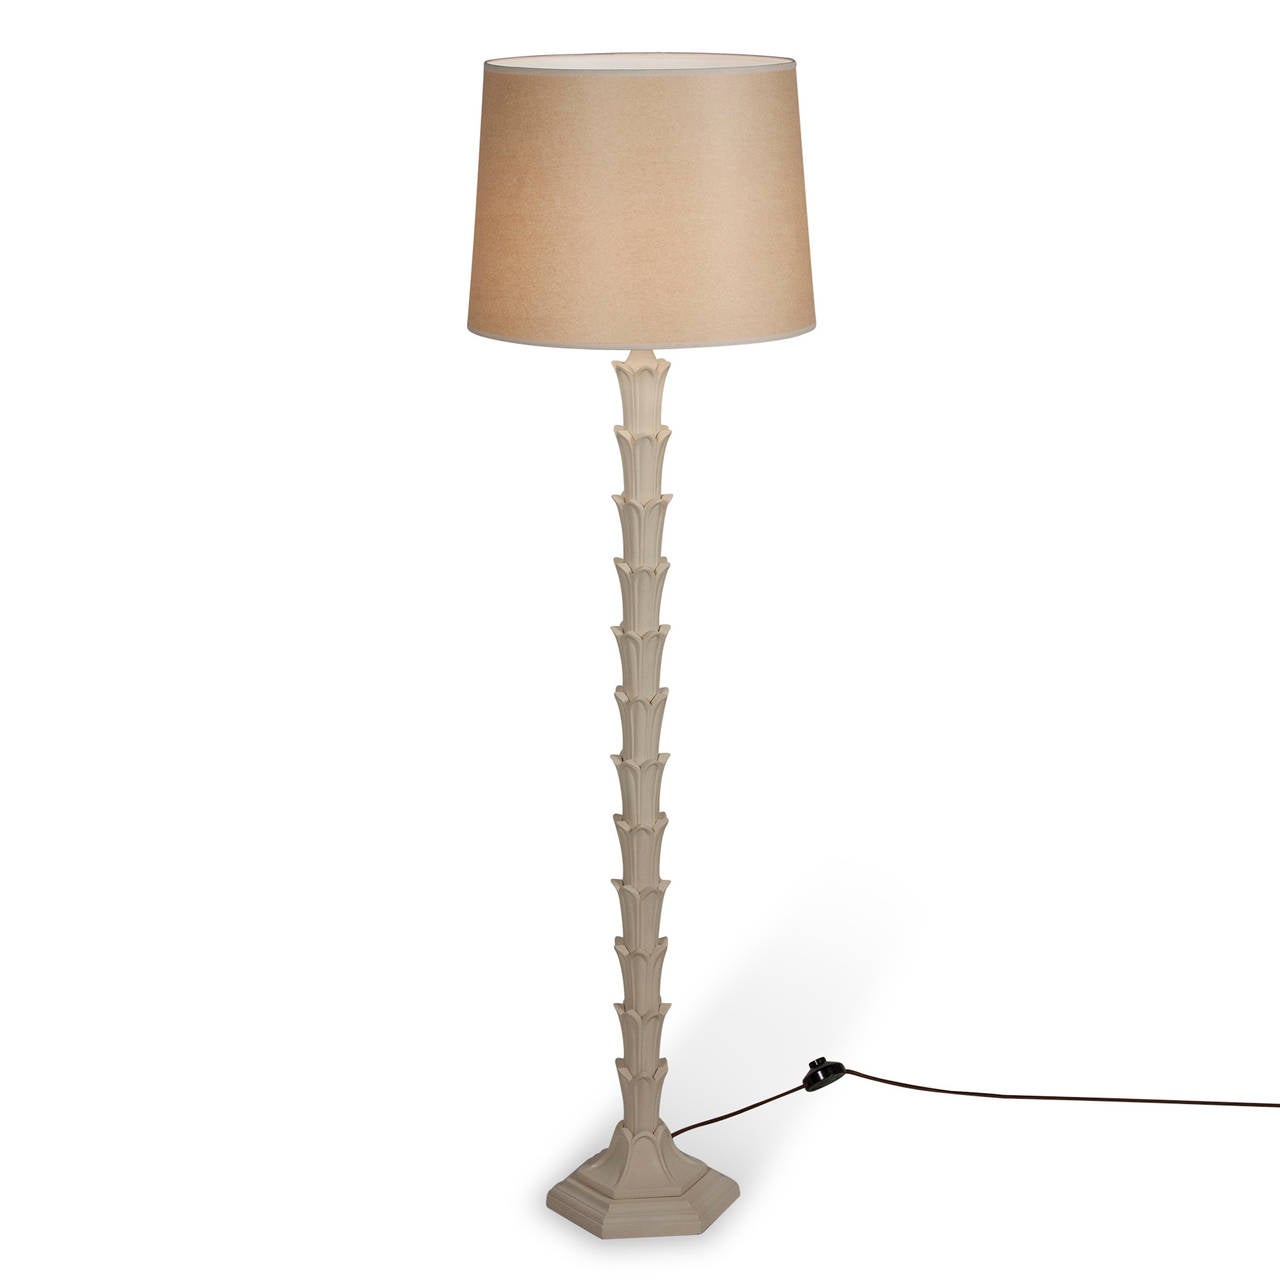 Antique white lacquered metal floor lamp, with acanthus leaf decoration going up the column, and on a hexagonal base, American, early 1960s. In custom paper shade. Height to top of shade 56 in, diameter of base 8 1/2 in. Shade measures top dia 12